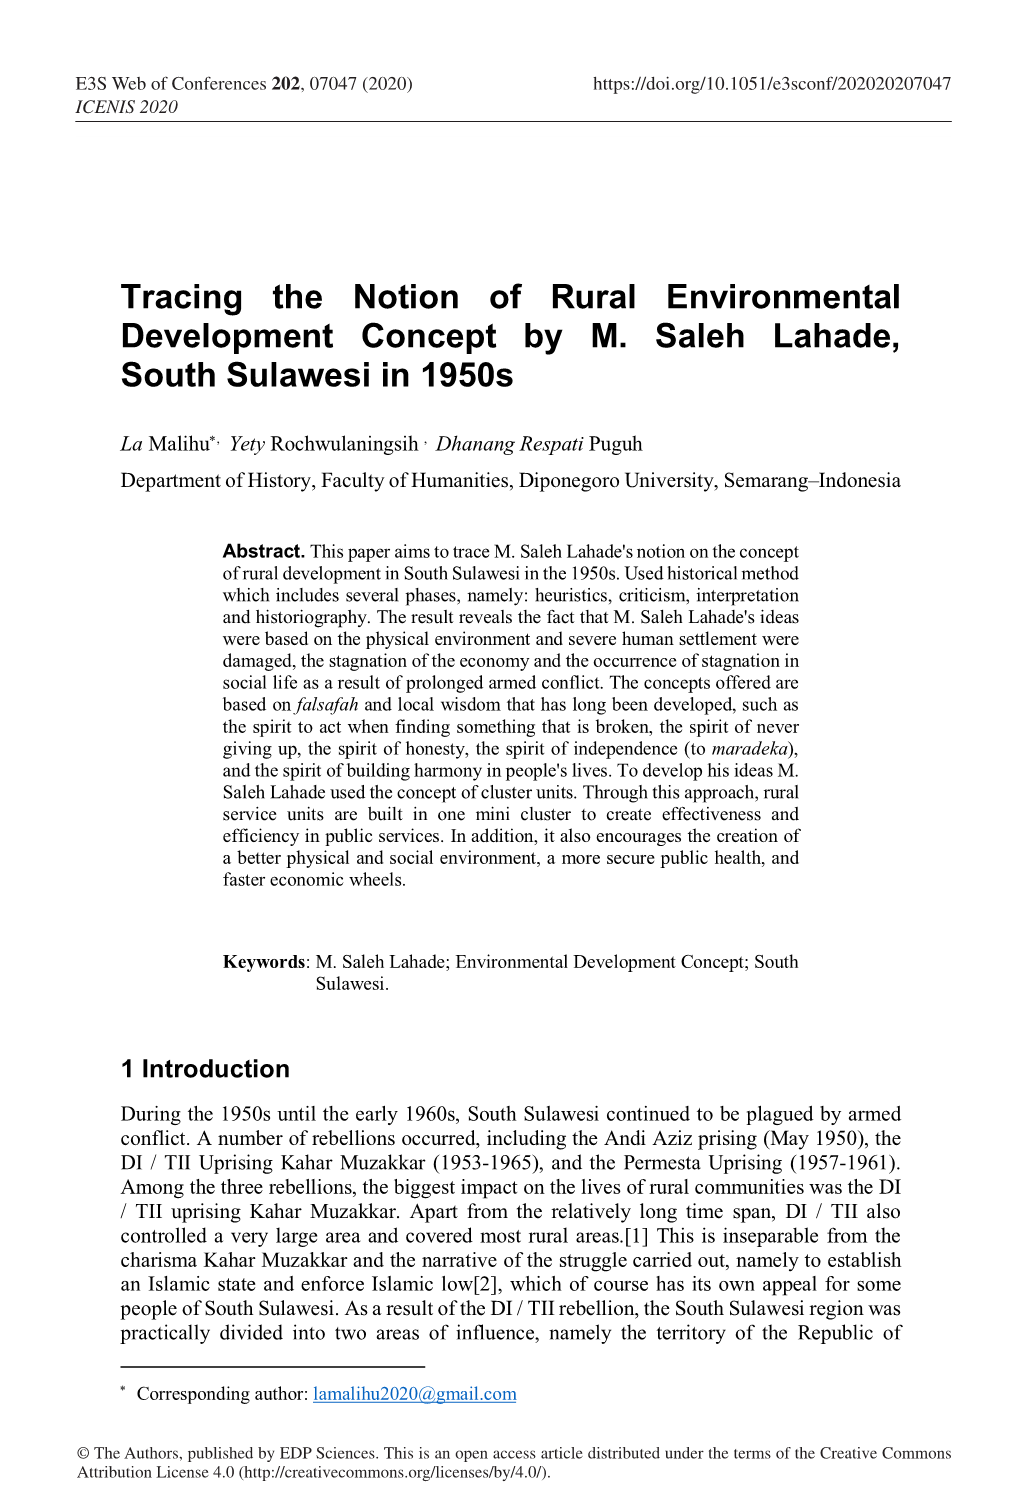 Tracing the Notion of Rural Environmental Development Concept by M